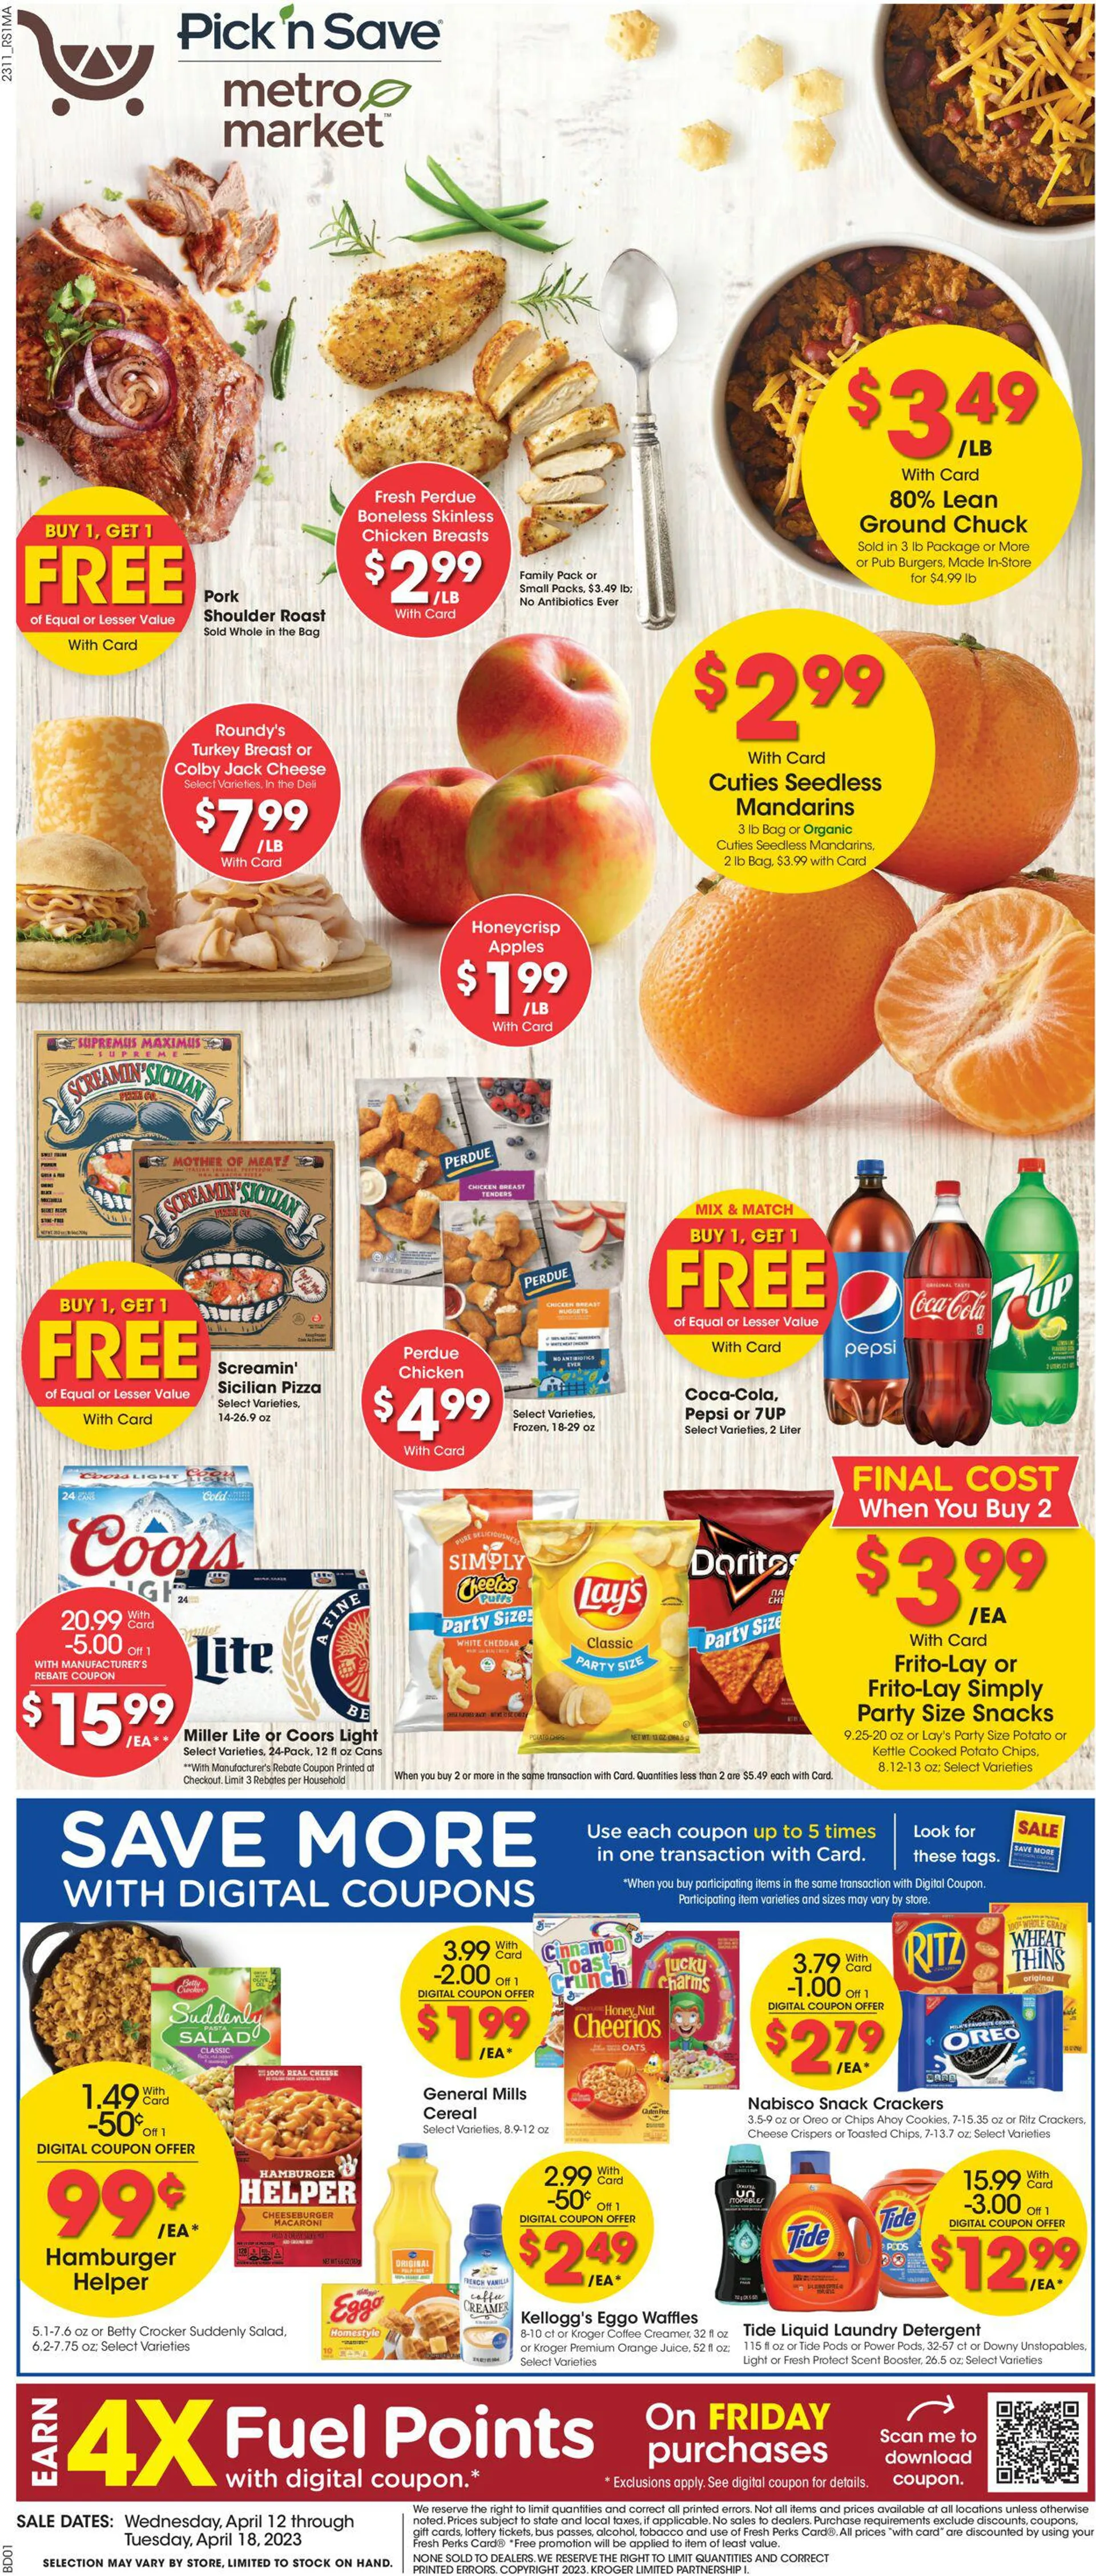 Metro Market Current weekly ad